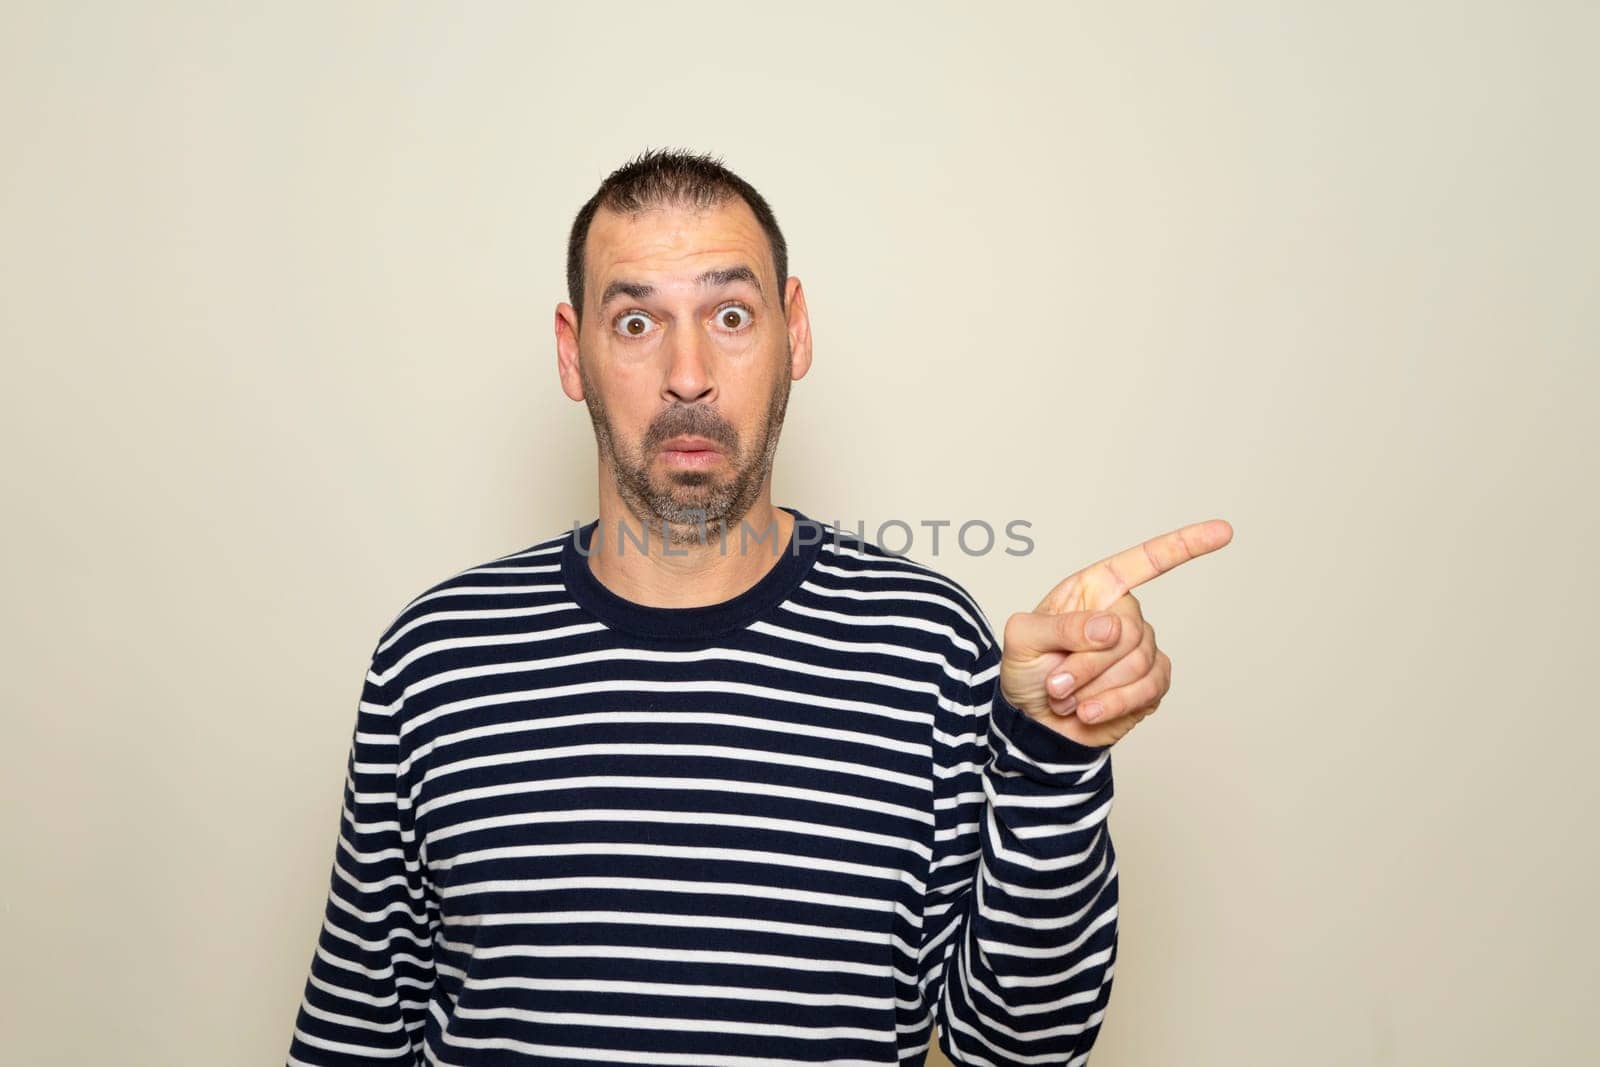 Hispanic man with beard in his 40s wearing a striped sweater pointing to the side with finger with a surprised face, isolated on beige background. by Barriolo82